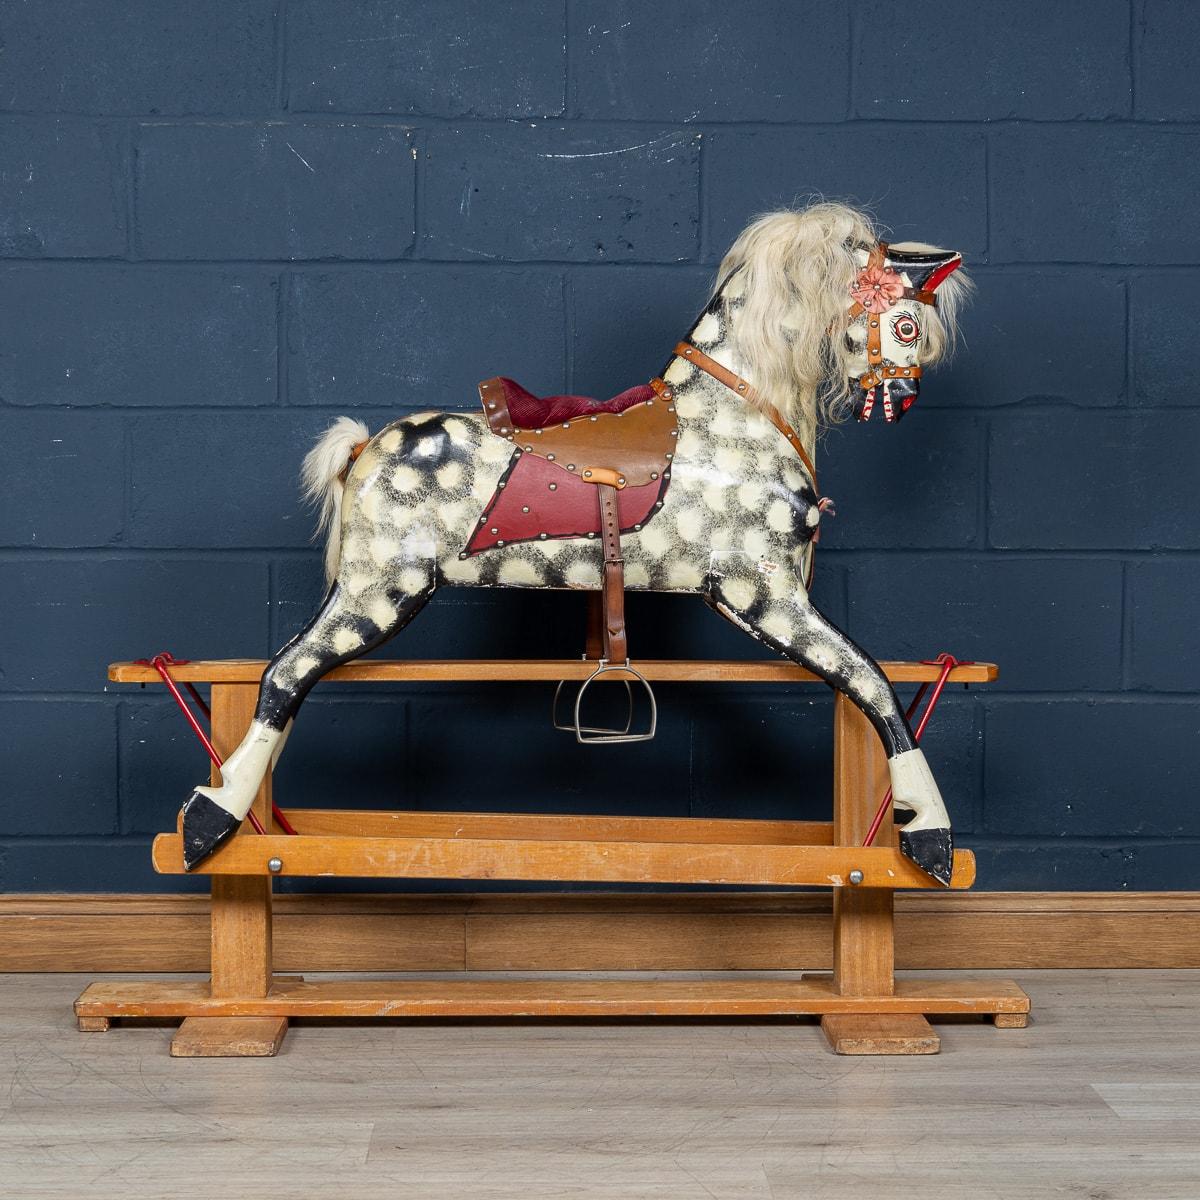 20th Century Wooden Childs Rocking Horse By Collinson, England c.1930 In Good Condition For Sale In Royal Tunbridge Wells, Kent